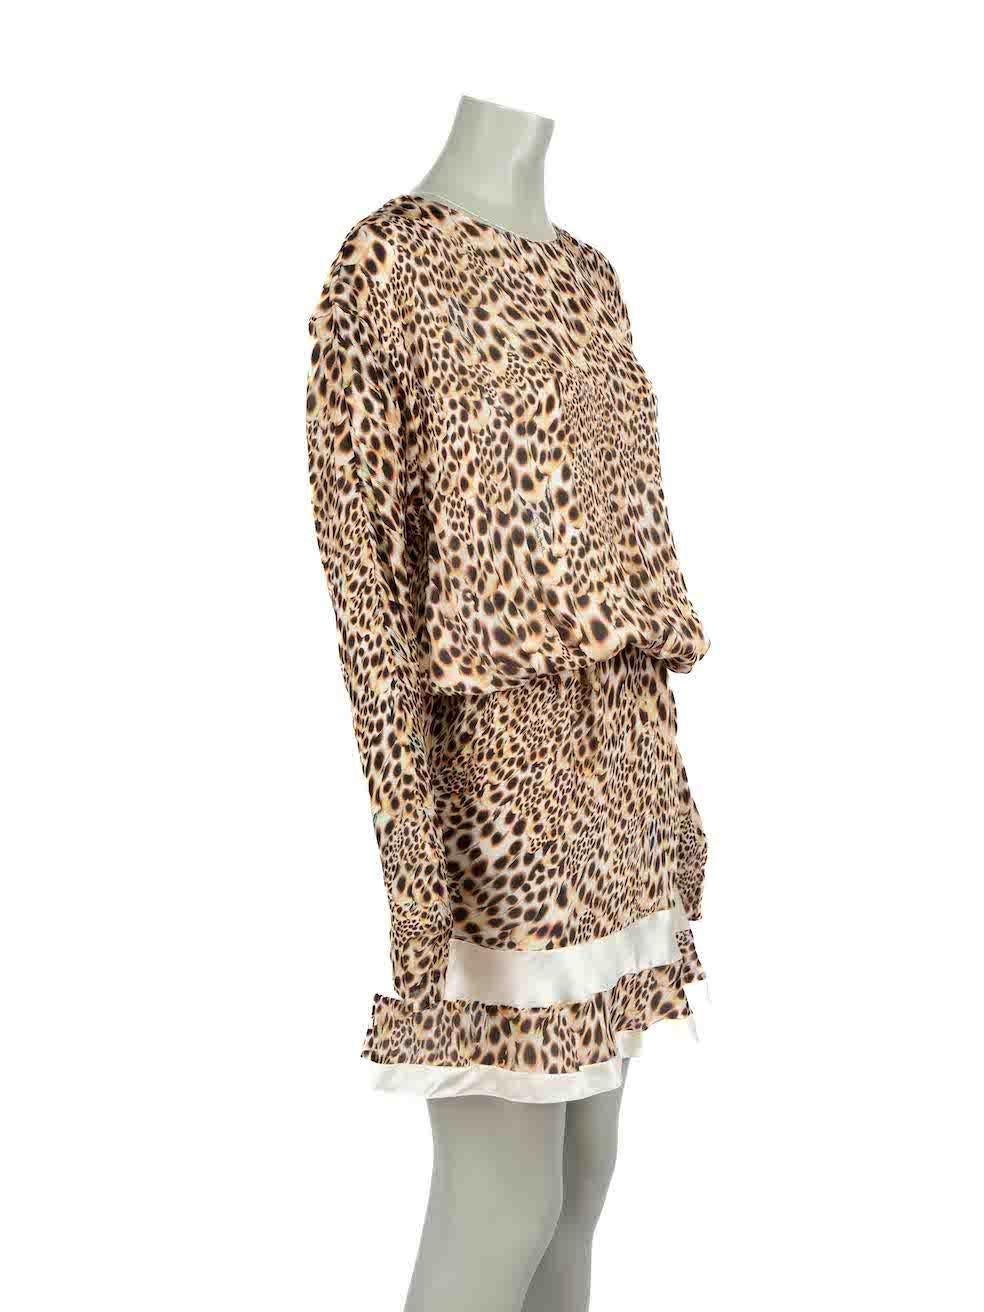 CONDITION is Never worn. No visible wear to dress is evident on this new Roberto Cavalli designer resale item.
 
 
 
 Details
 
 
 Brown
 
 Silk
 
 Knee length dress
 
 Leopard print pattern
 
 Elasticated waistband
 
 Round neckline
 
 Zipped